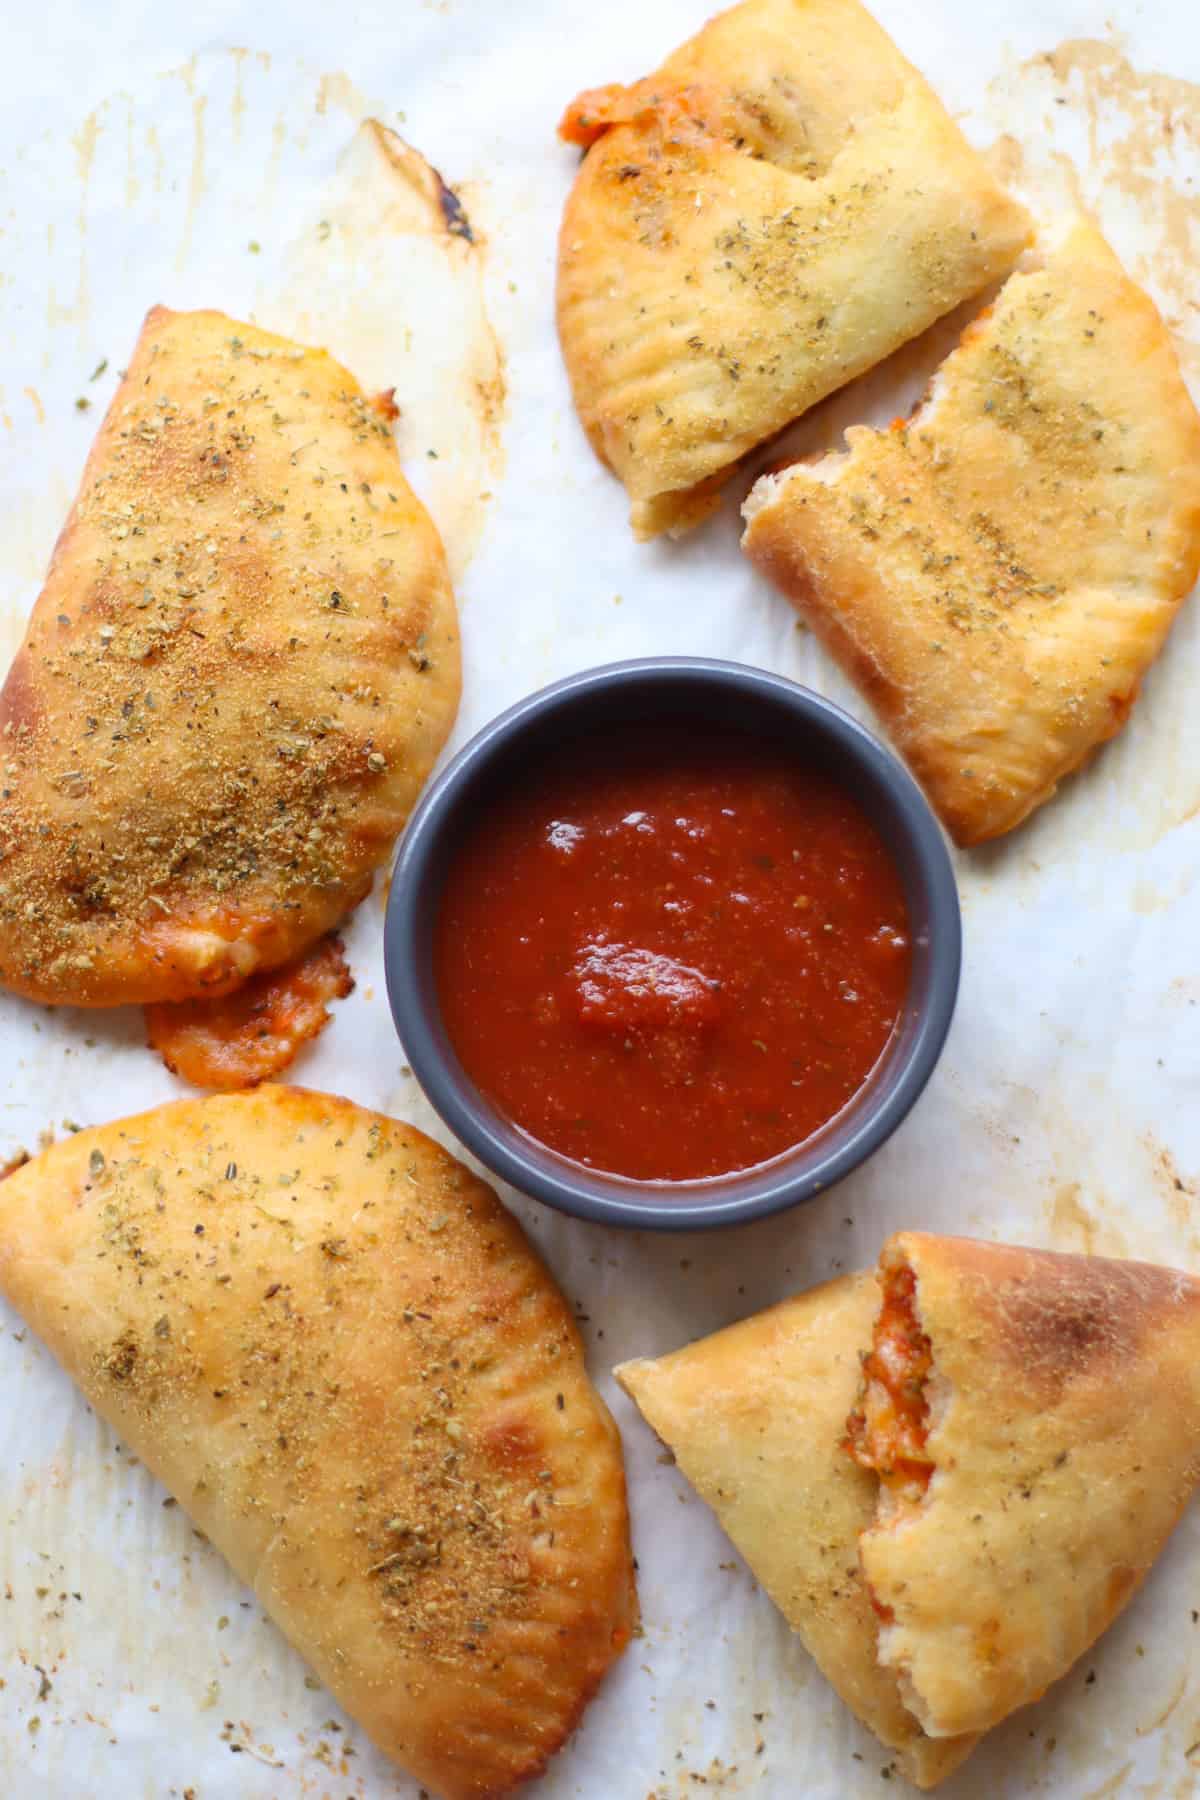 Cooked pizza pockets arranged around a dipping container of pizza sauce.